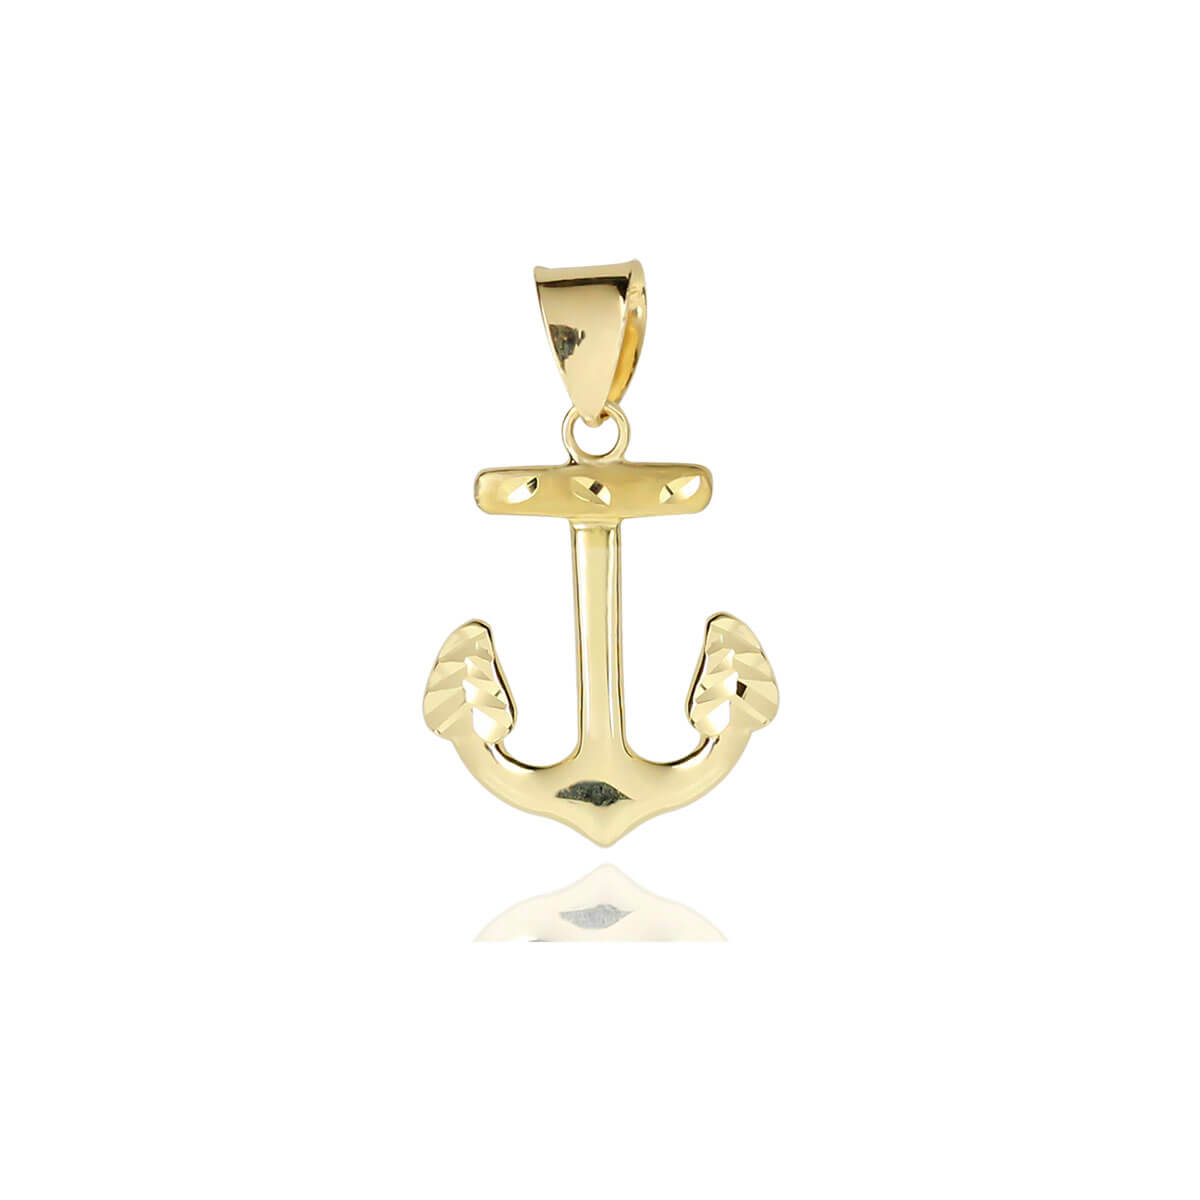 Solid 18ct Yellow Gold Anchor Pendant